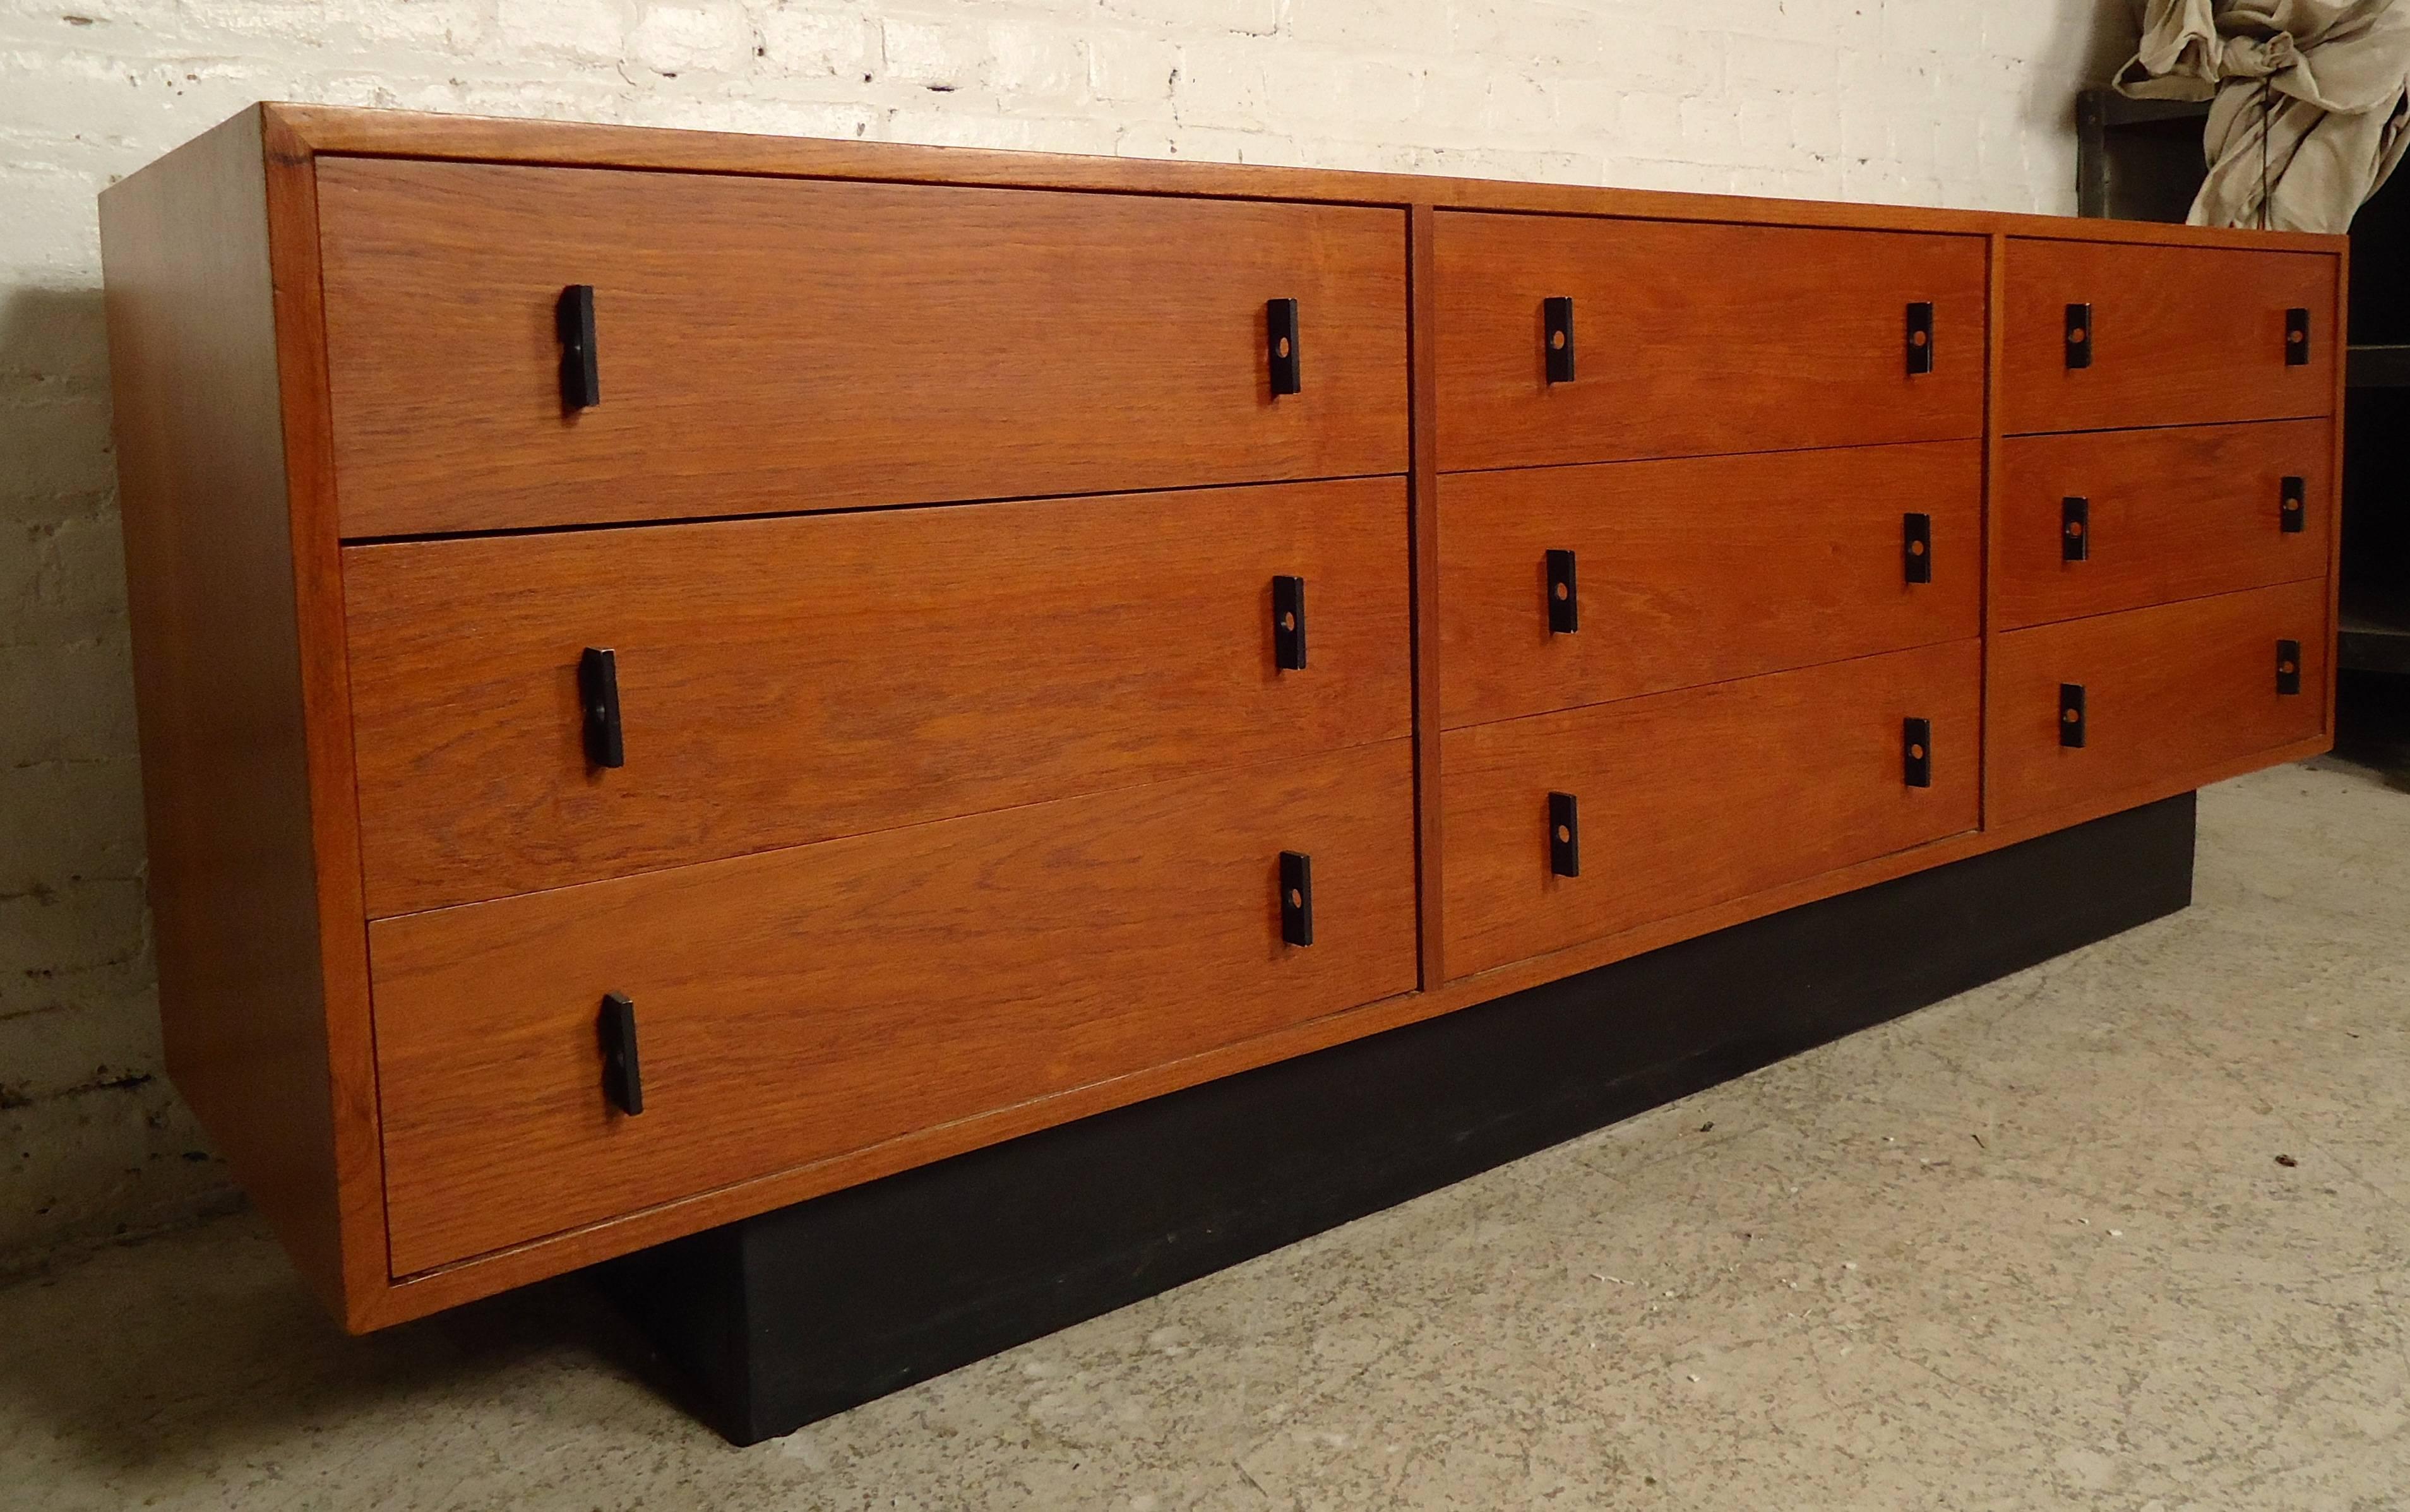 Unique vintage-modern dresser features nine spacious drawers, black metal pulls, and a black base. Warm teak grain throughout.

Please confirm item location (NY or NJ).